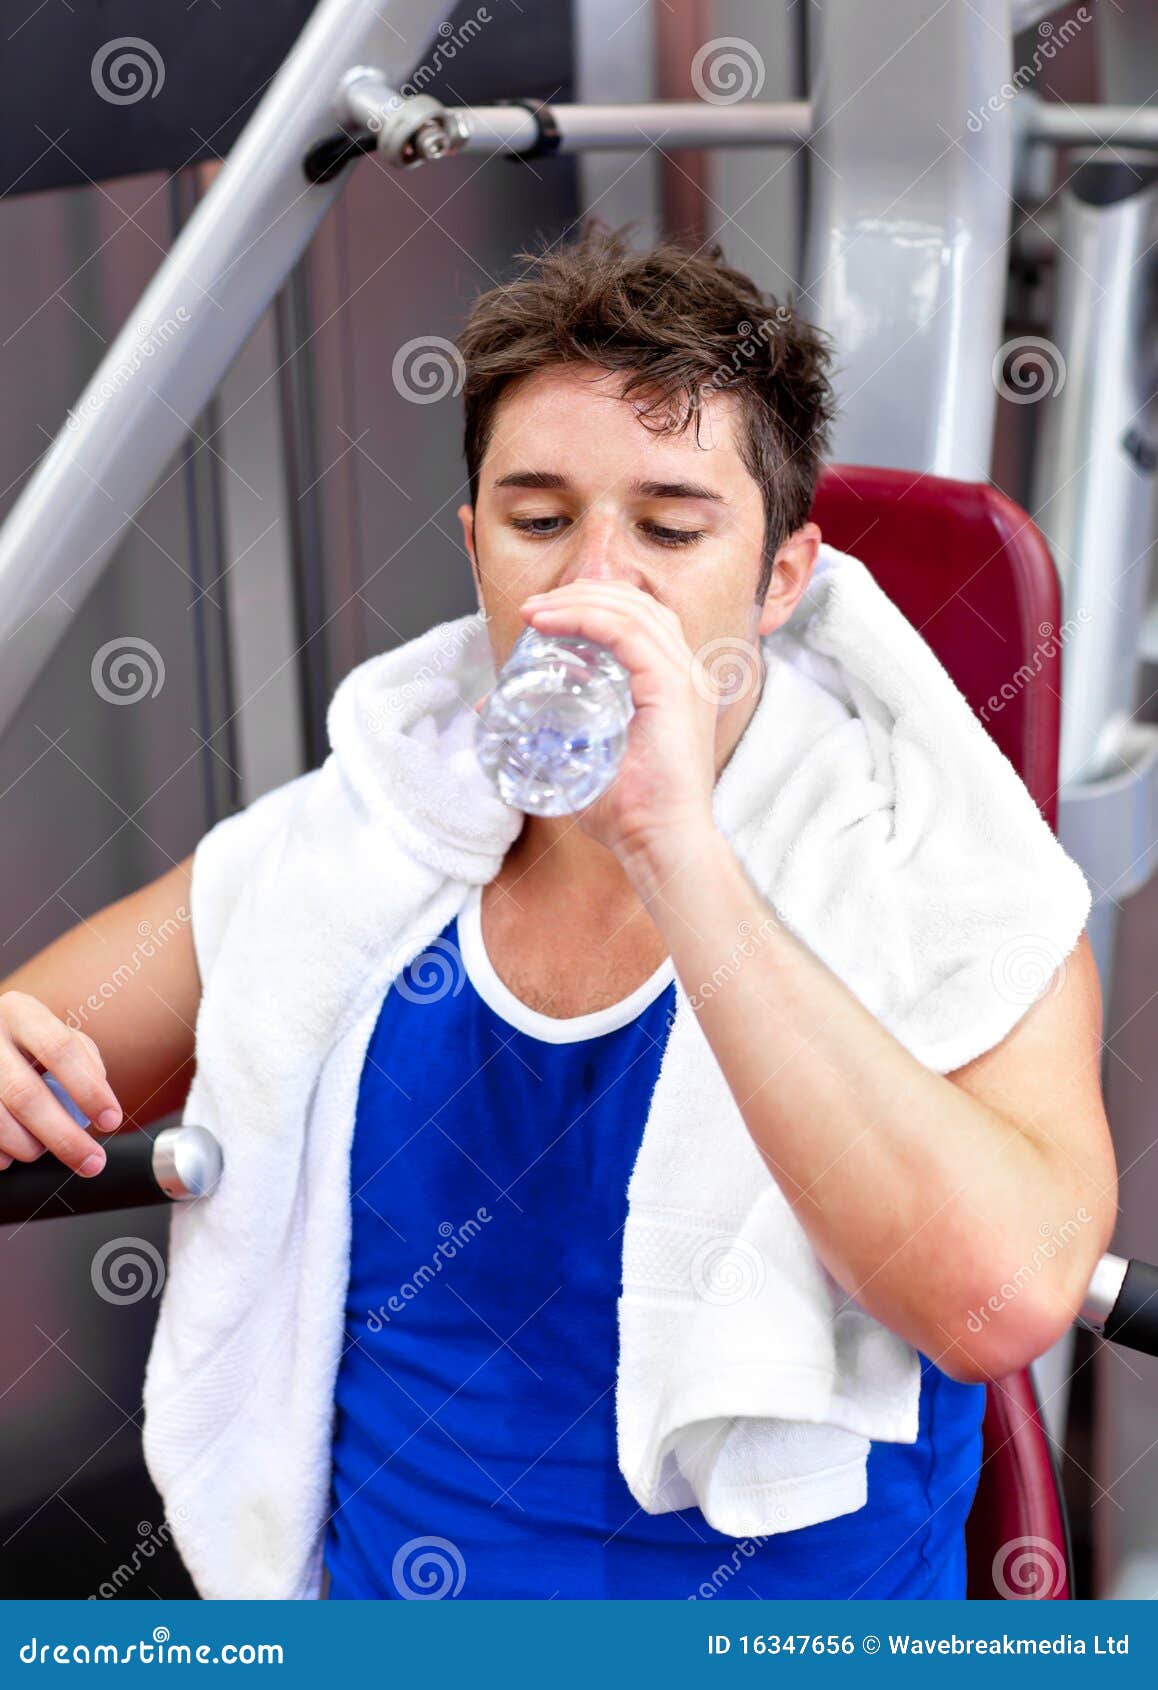 Happy young man drinking water after workout outdoors stock photo (124775)  - YouWorkForThem